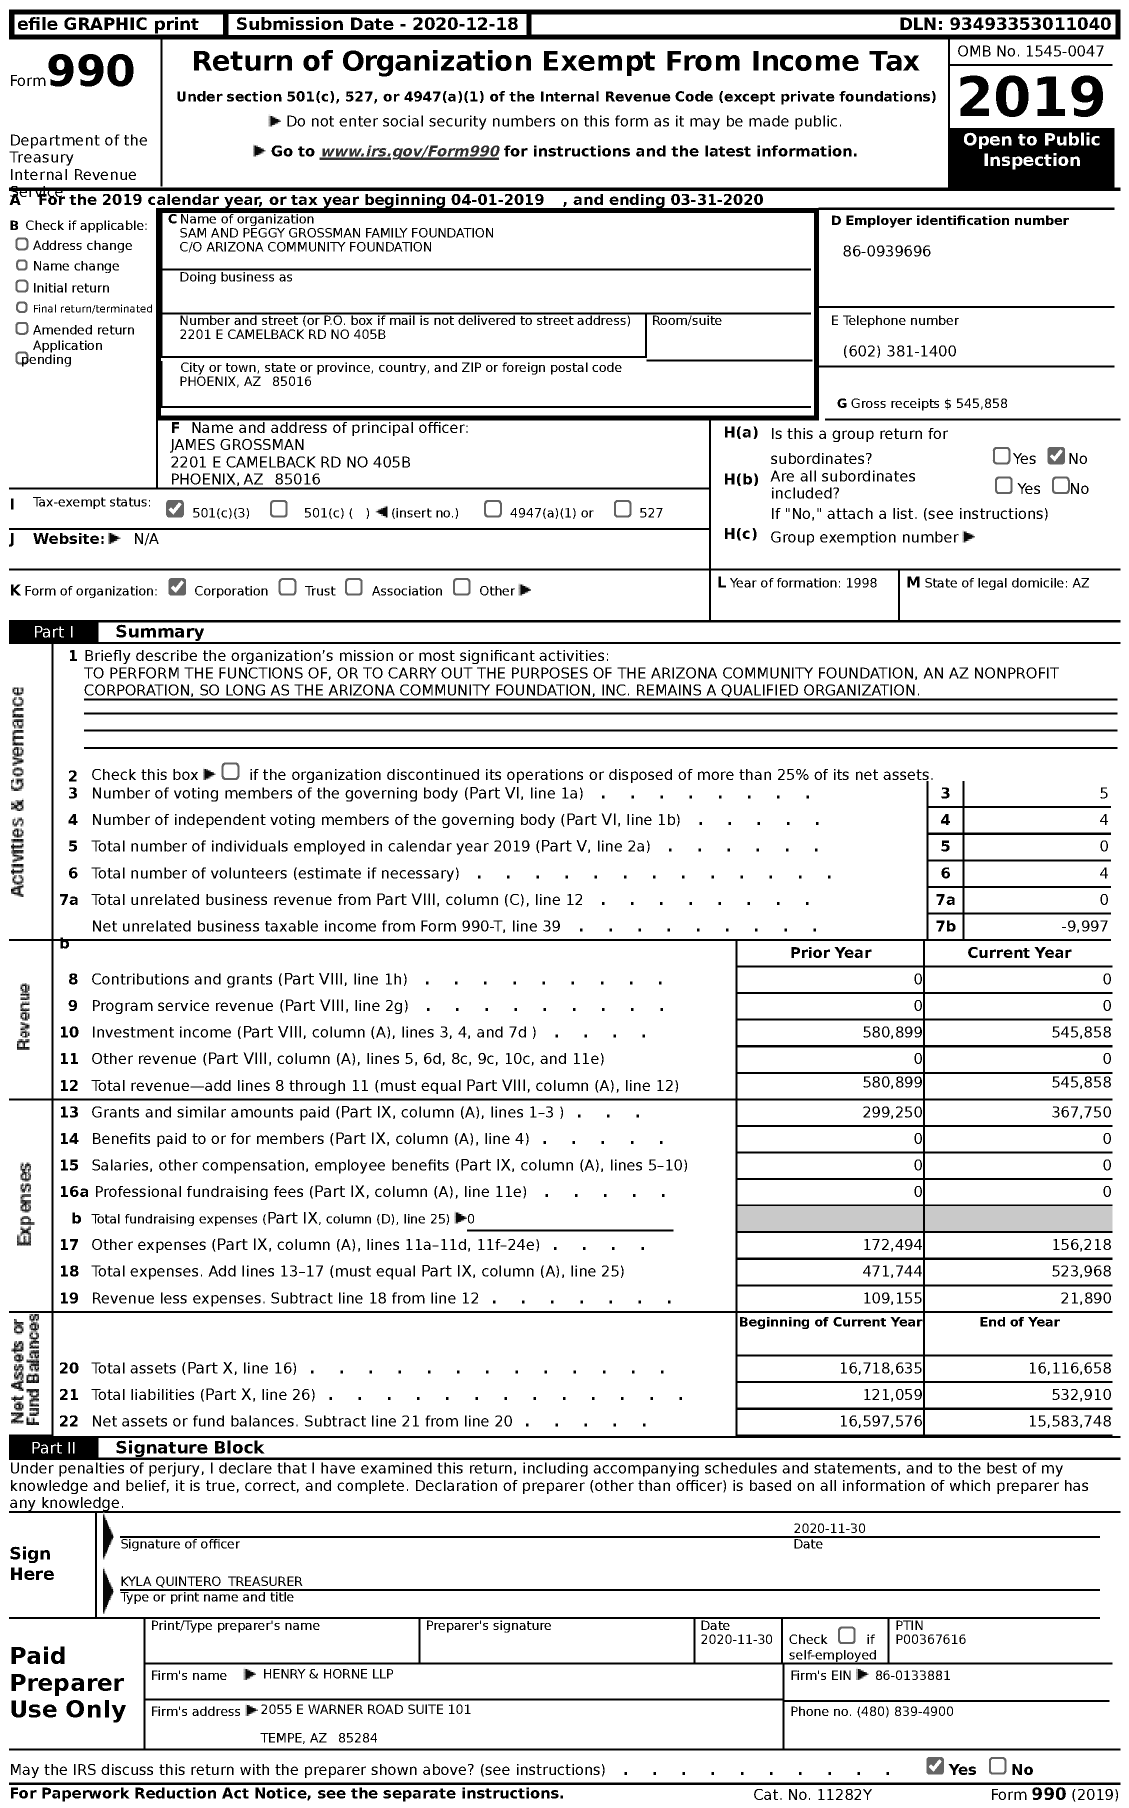 Image of first page of 2019 Form 990 for Sam and Peggy Grossman Family Foundation